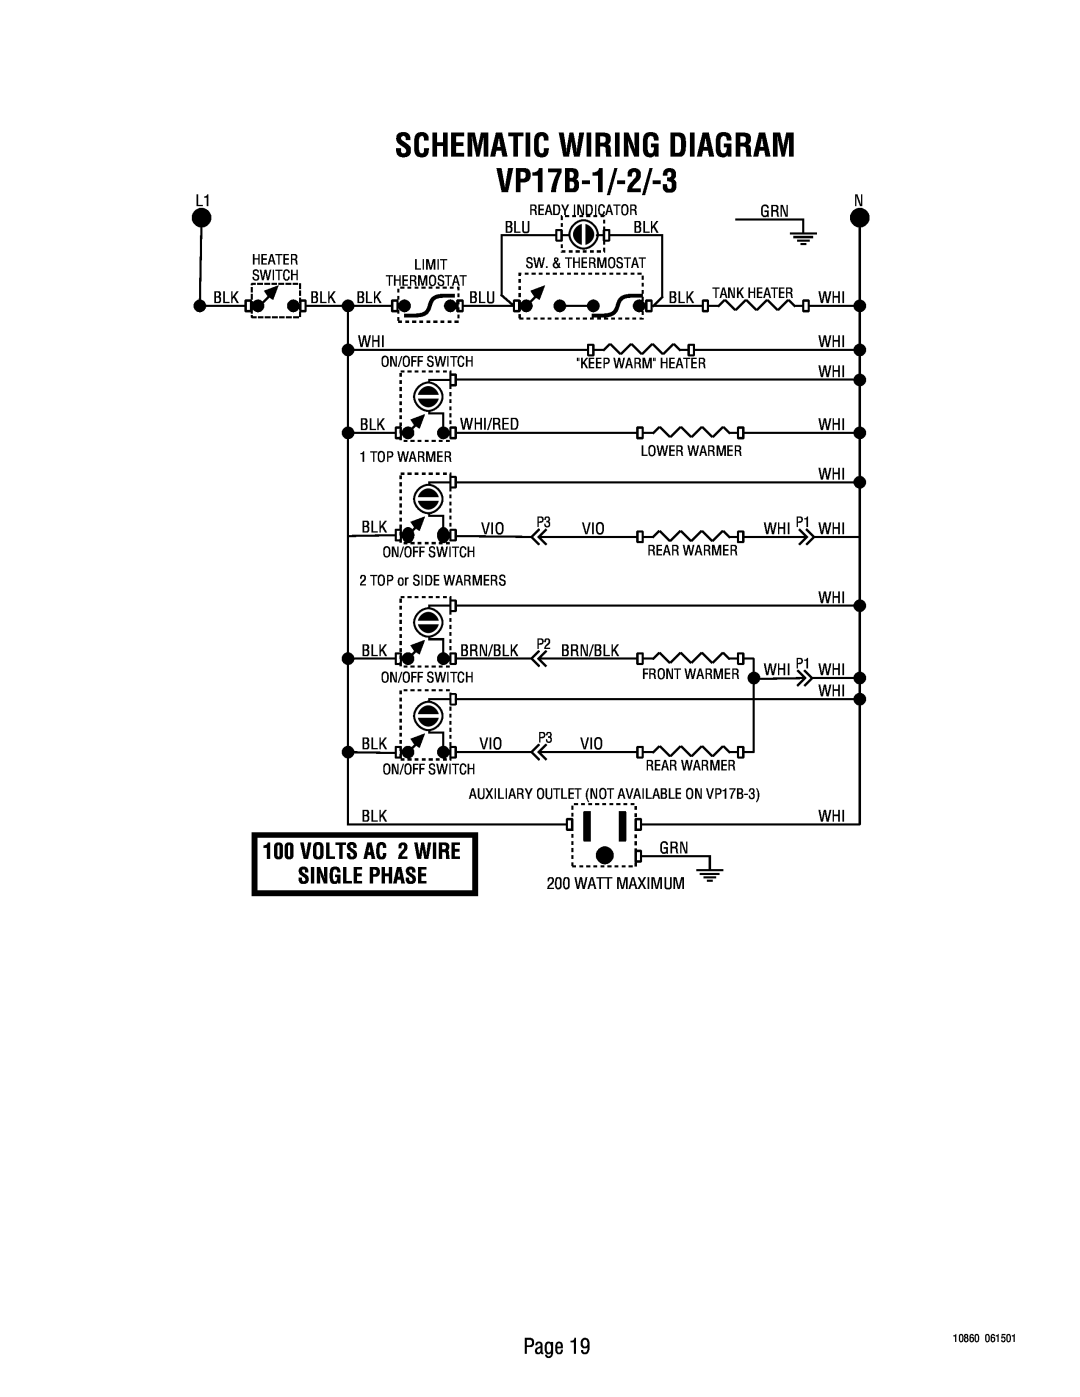 Bunn service manual VP17B-1/-2/-3, Single Phase, Schematic Wiring Diagram, VOLTS AC 2 WIRE 